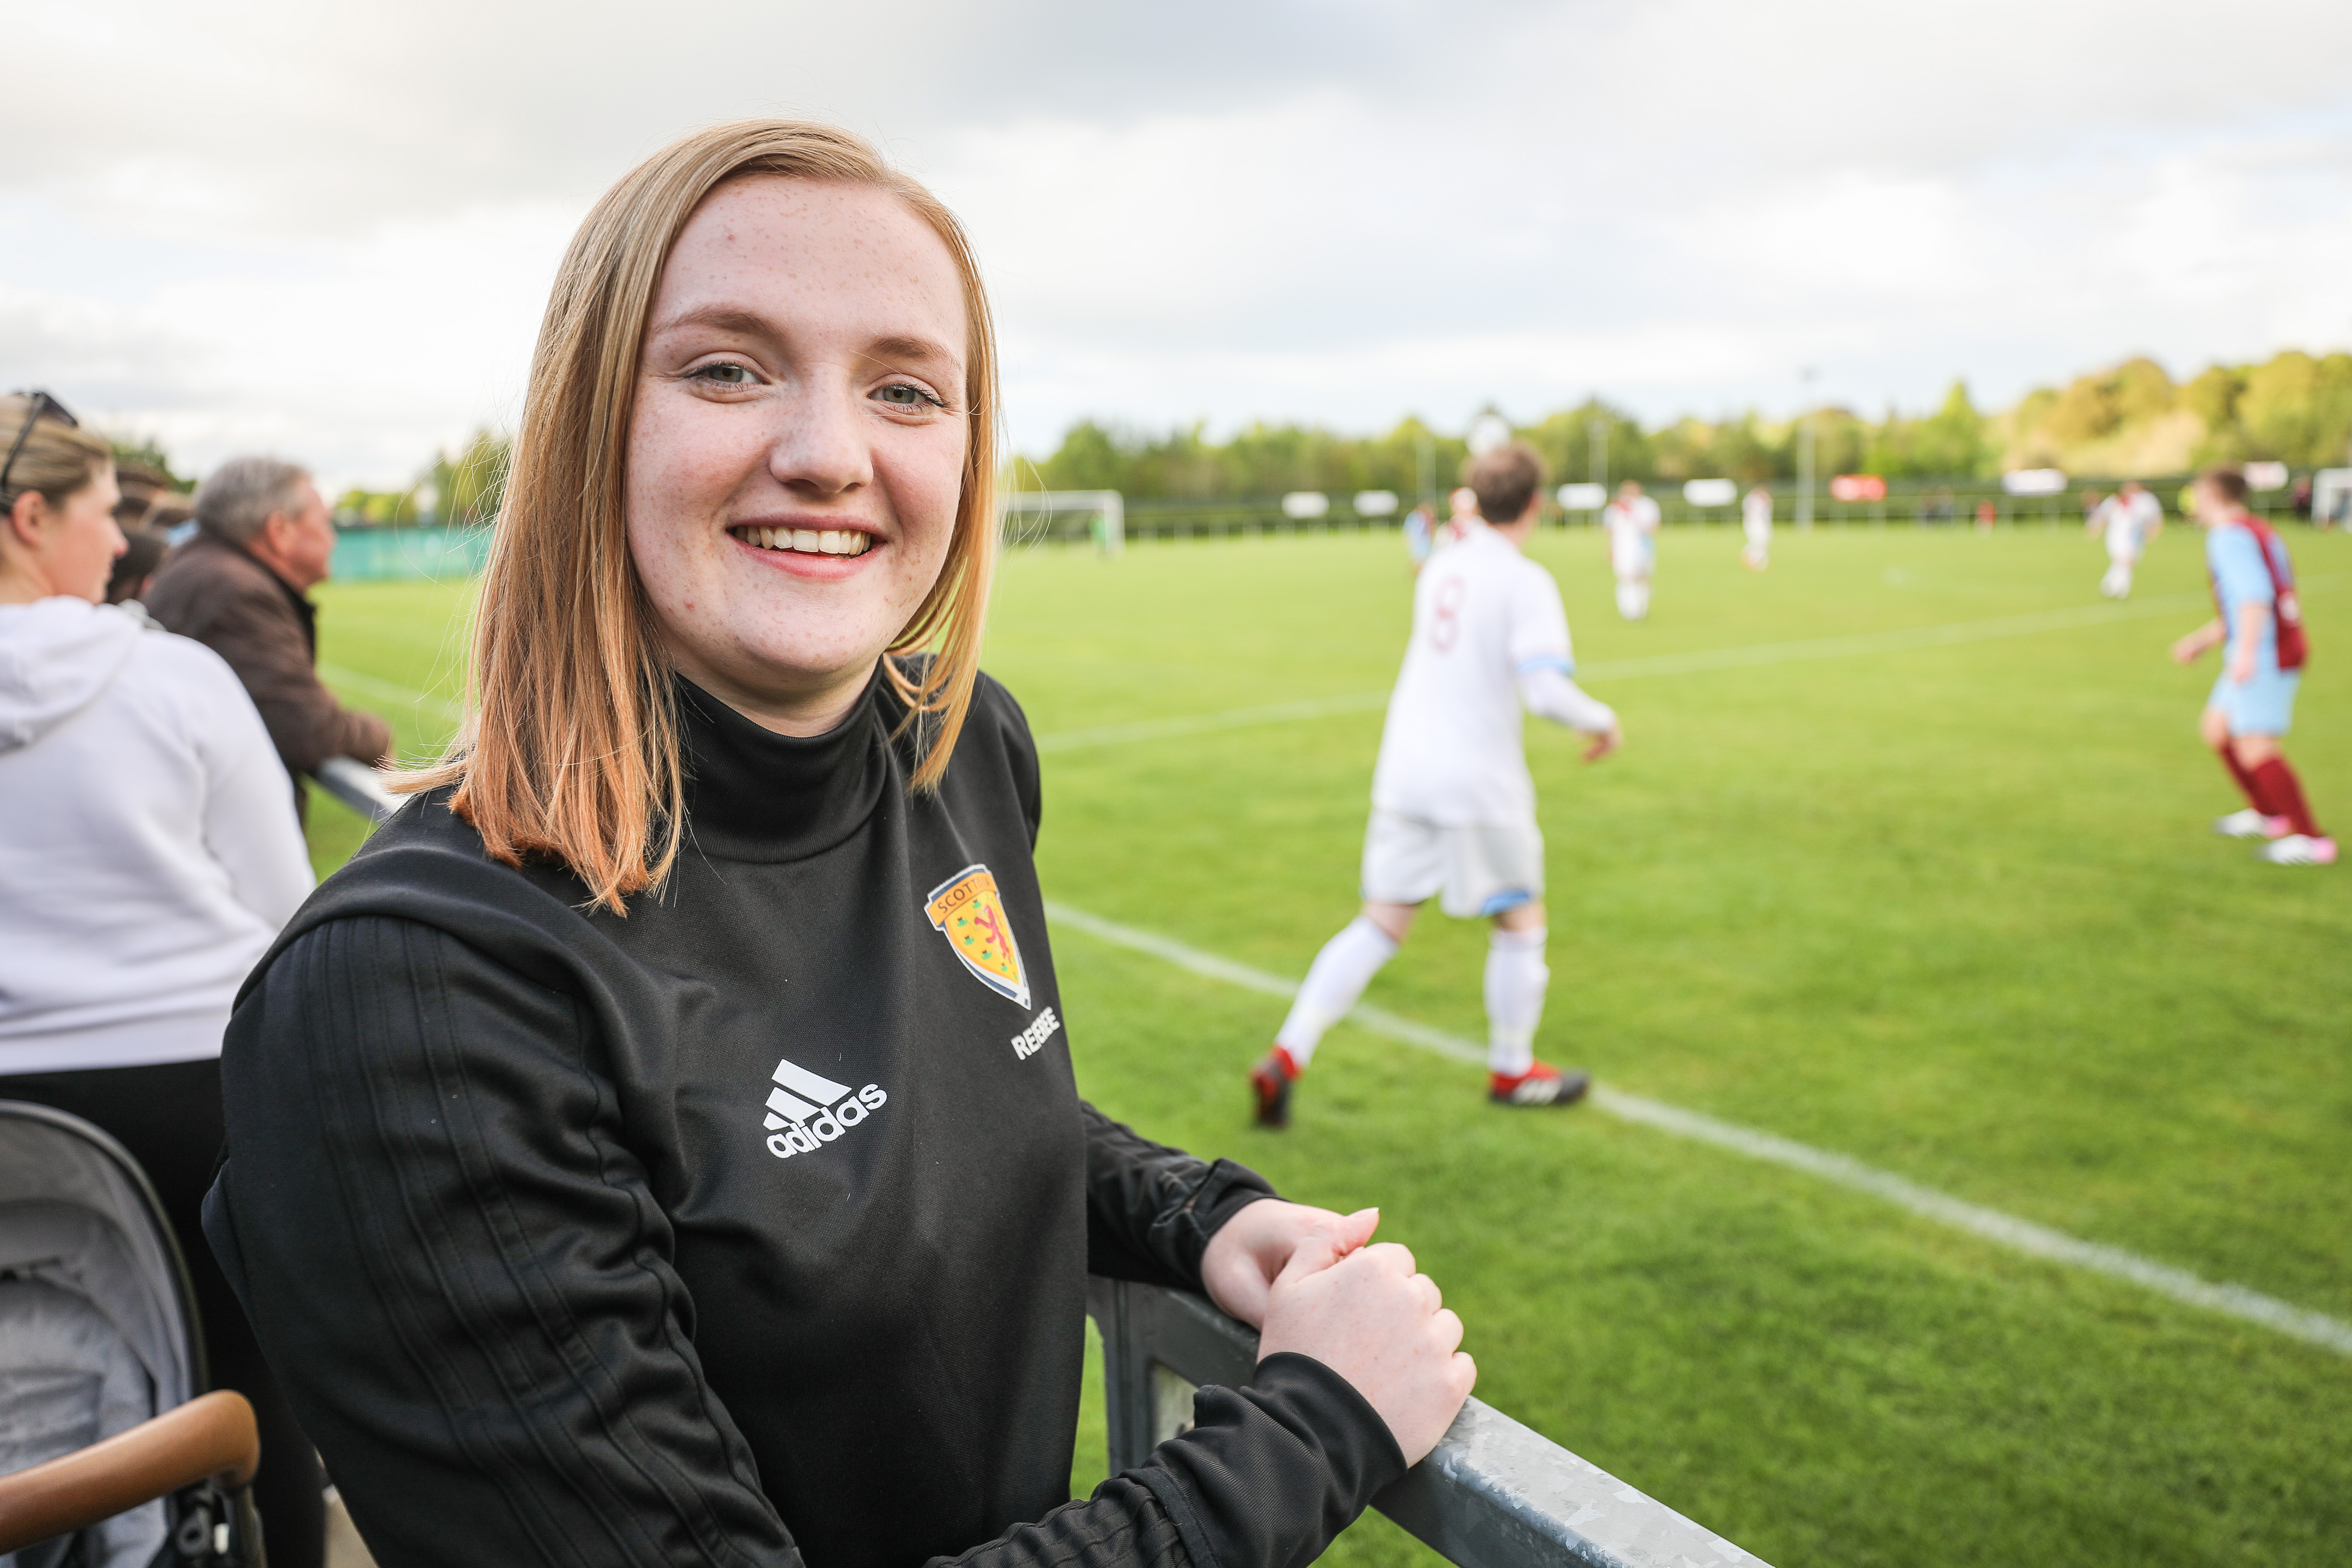 Isla is promoting the benefits of football to mental wellbeing